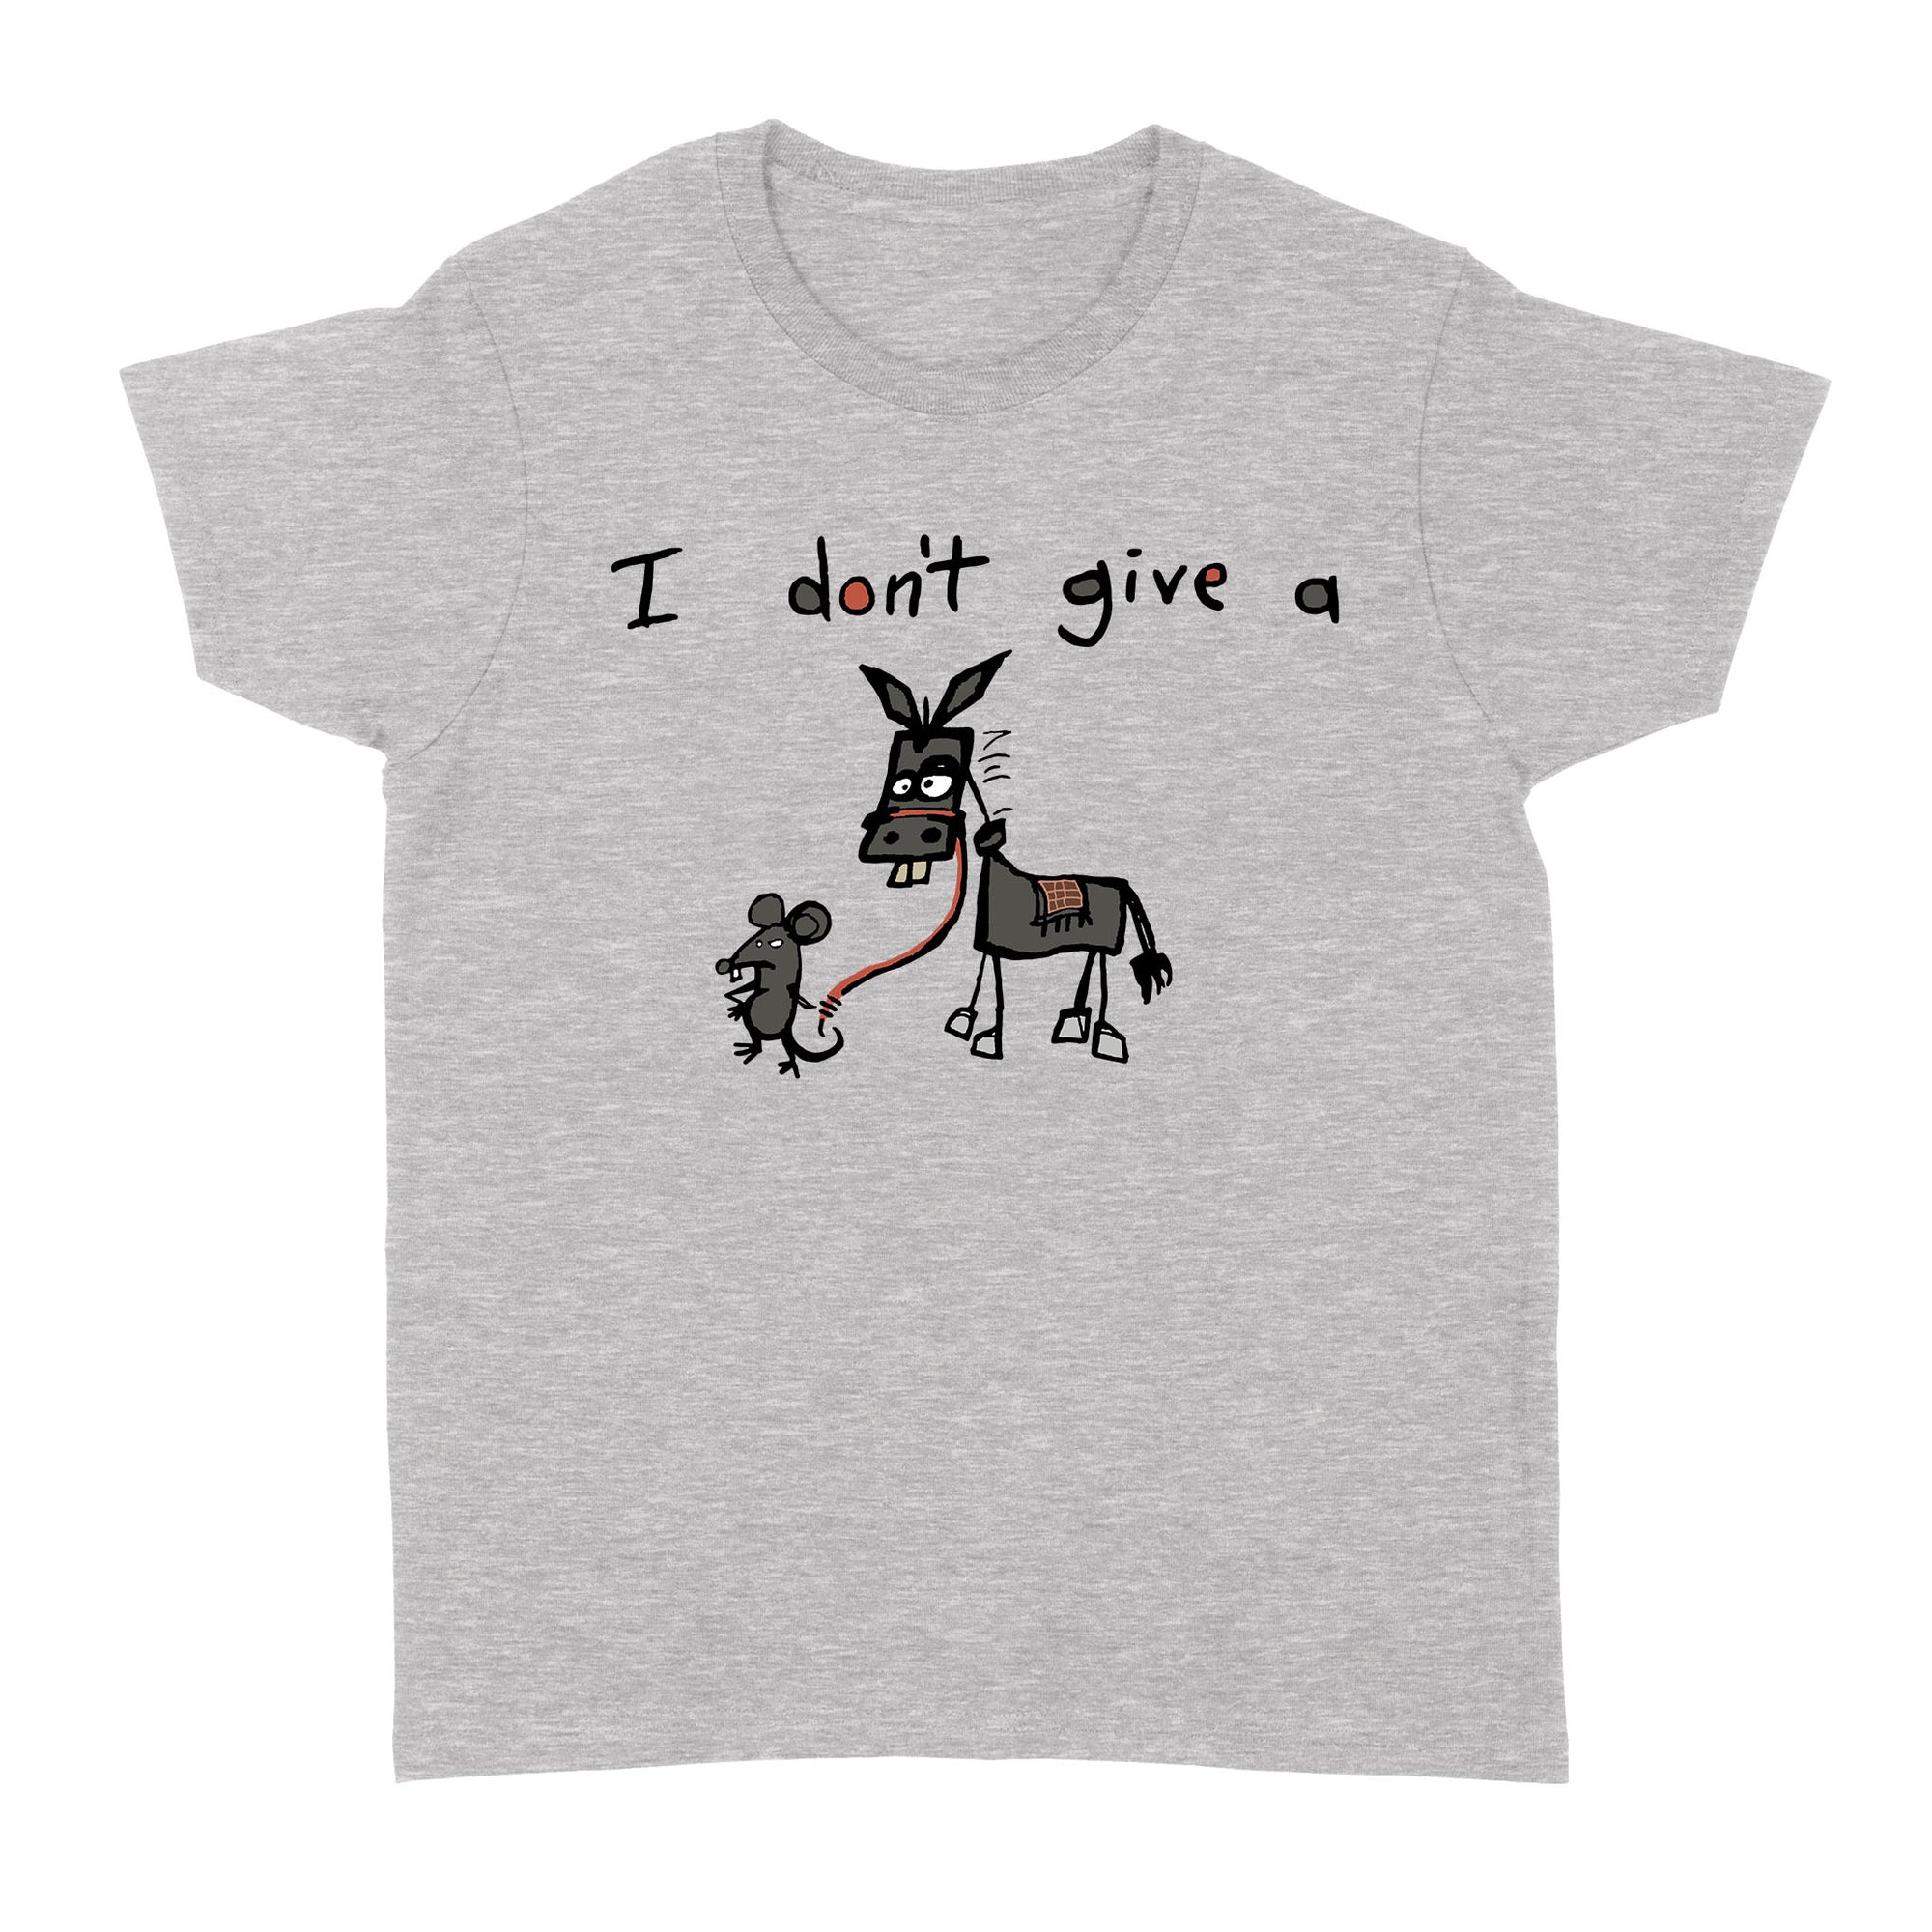 I Dont Give A Donkey Mouse Rat Jackass Funny Sarcasm Humor Gift Ideas for Him Her Women Men - Standard Women's T-shirt